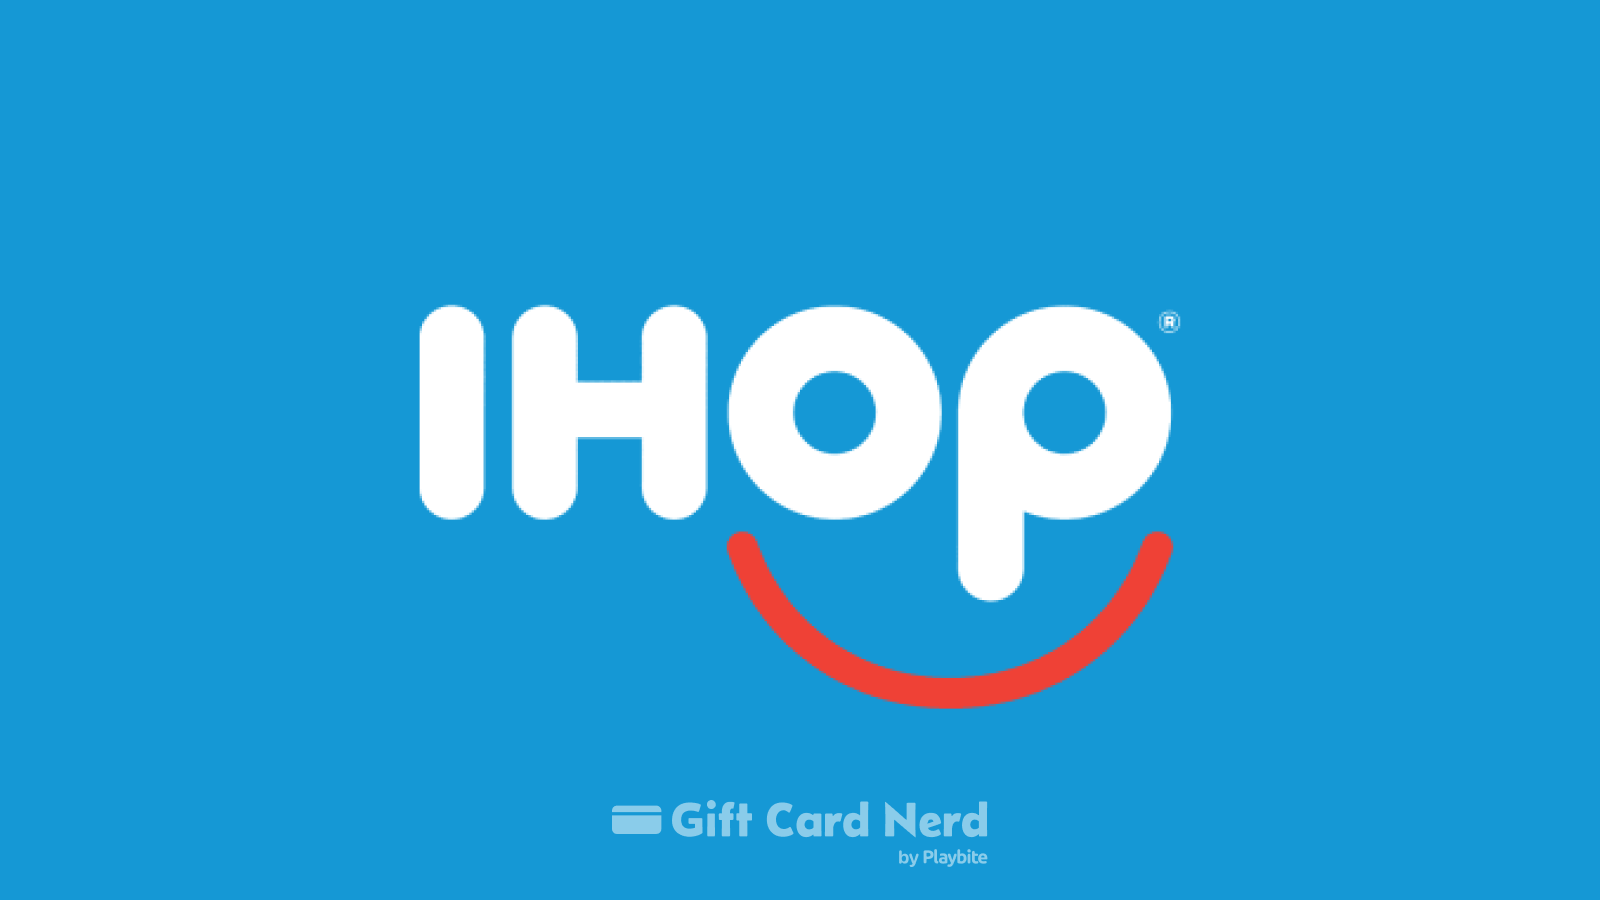 Does GameStop Sell IHOP Gift Cards?